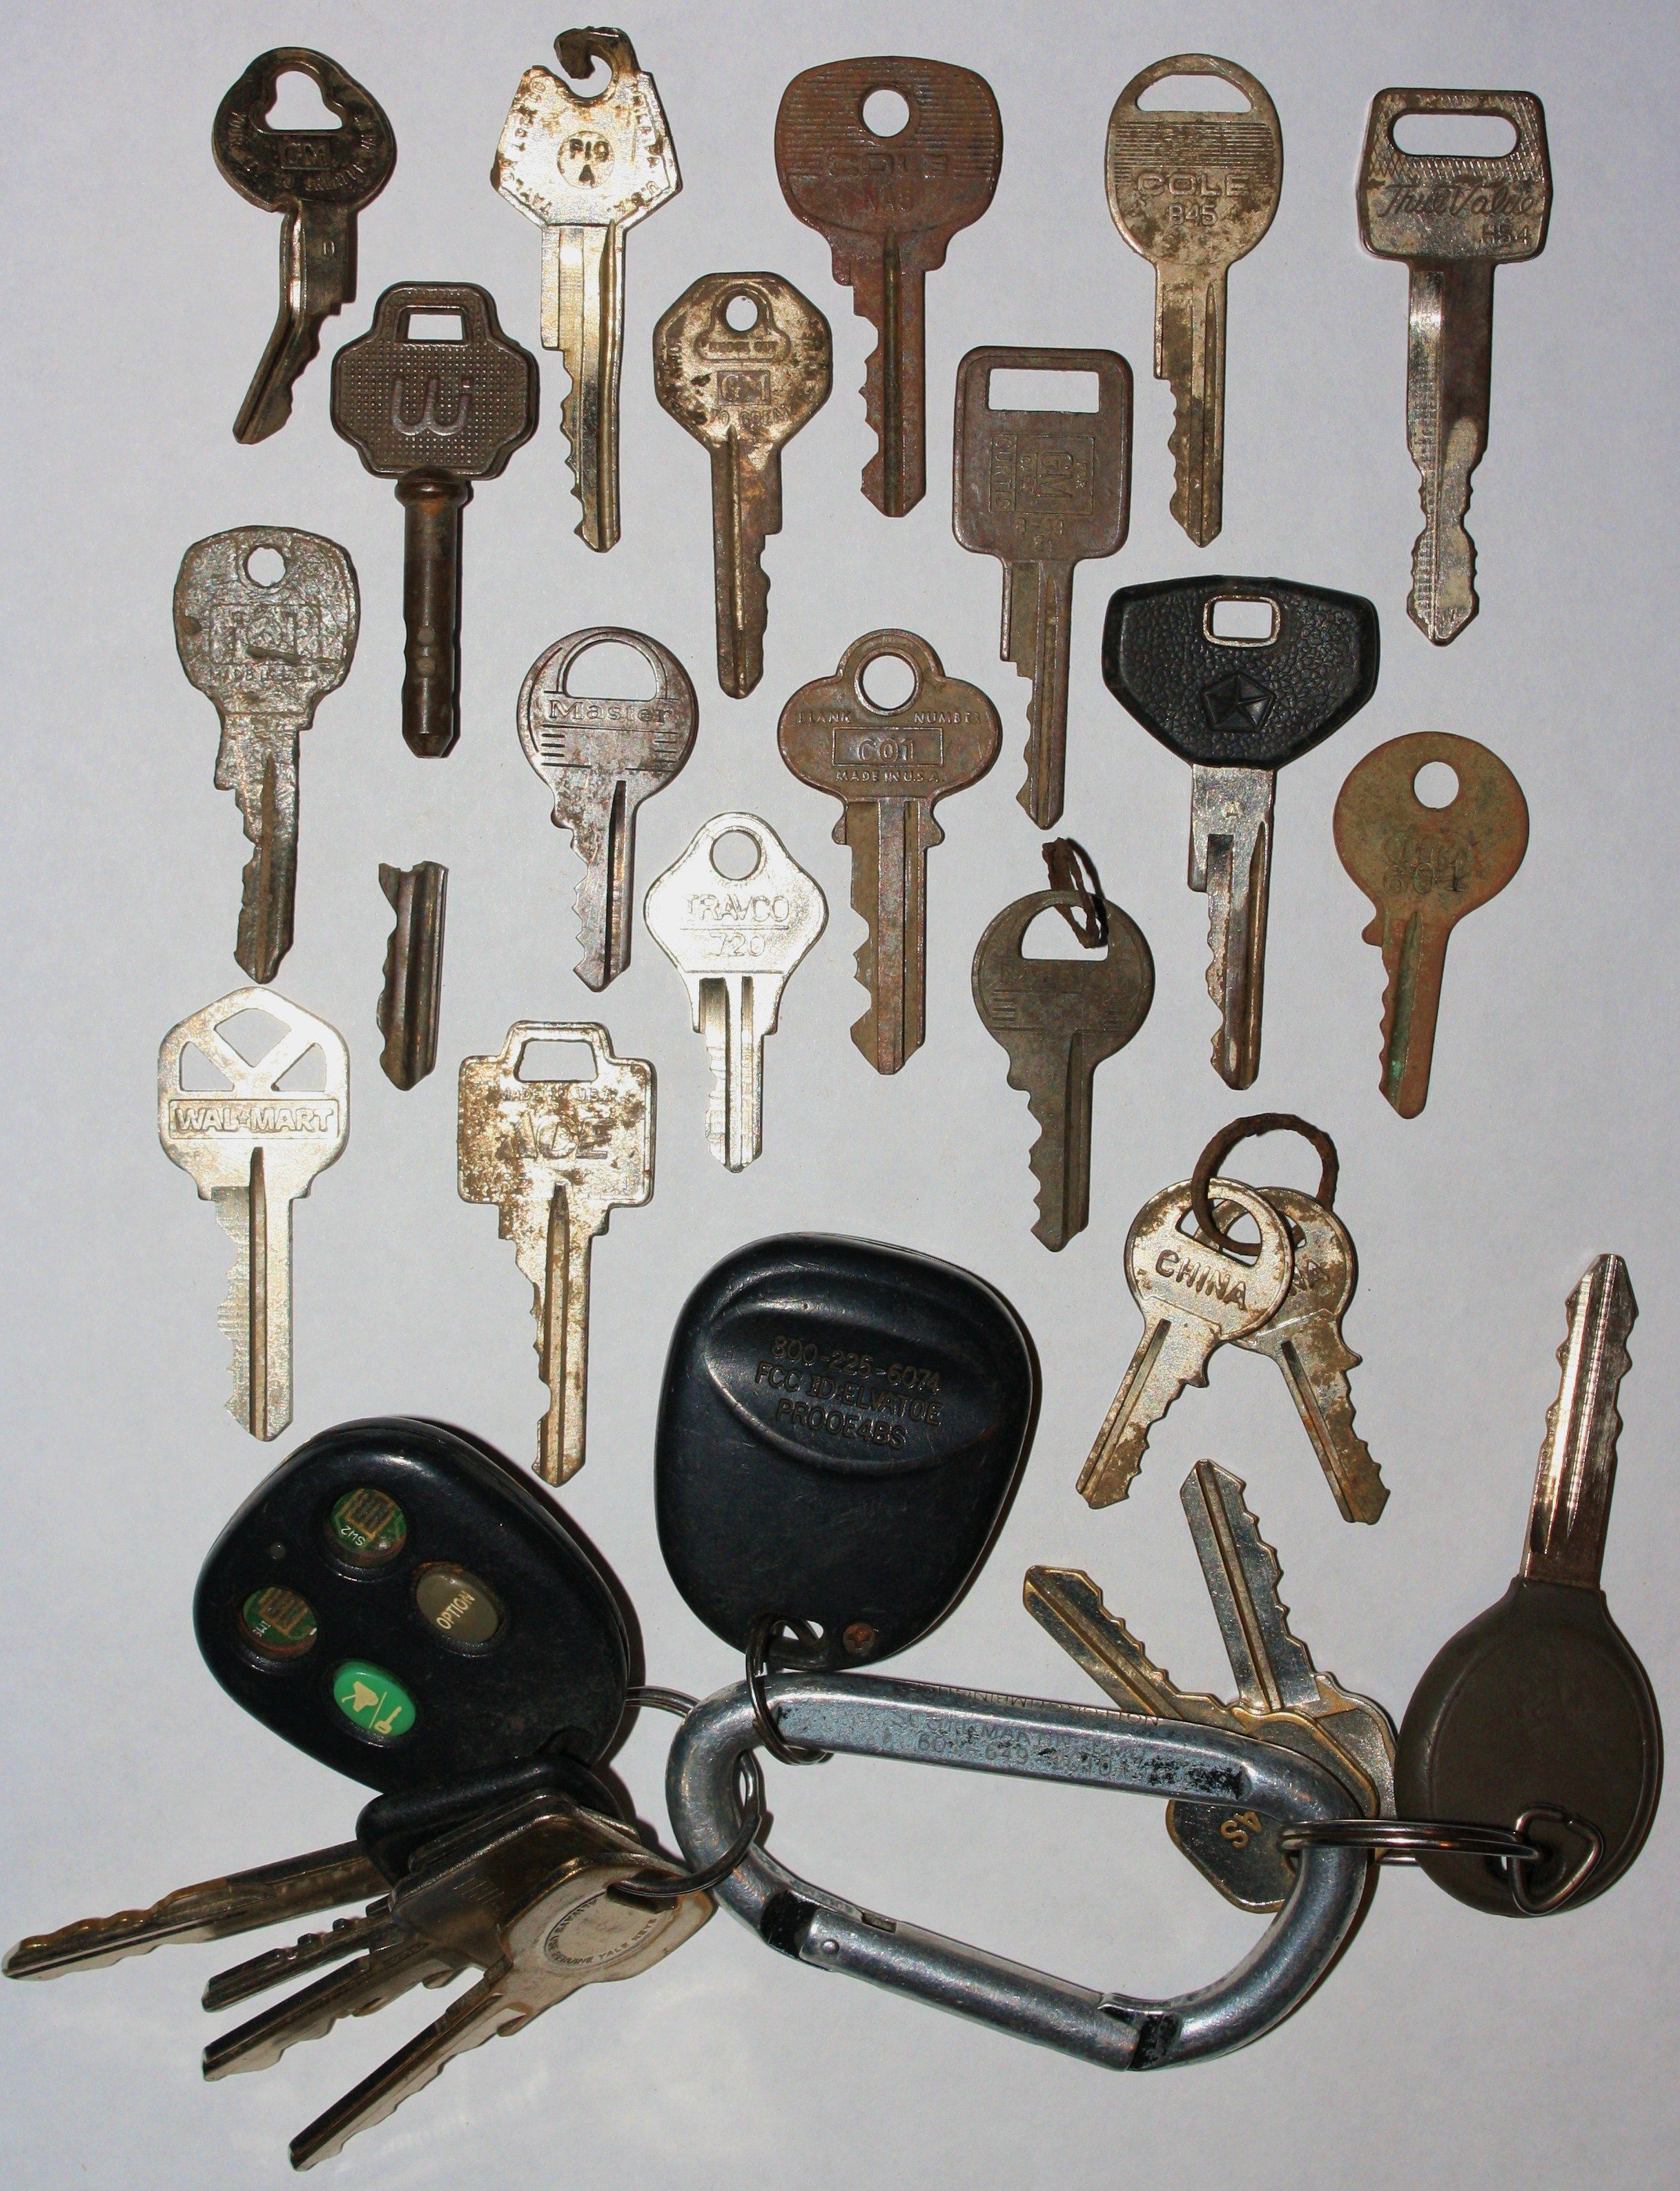 IMG 2231 All the dang keys I found in 2012.  House, car, garage, lock and deposit keys.  Wow, just think of how much turmoil all of these might have c